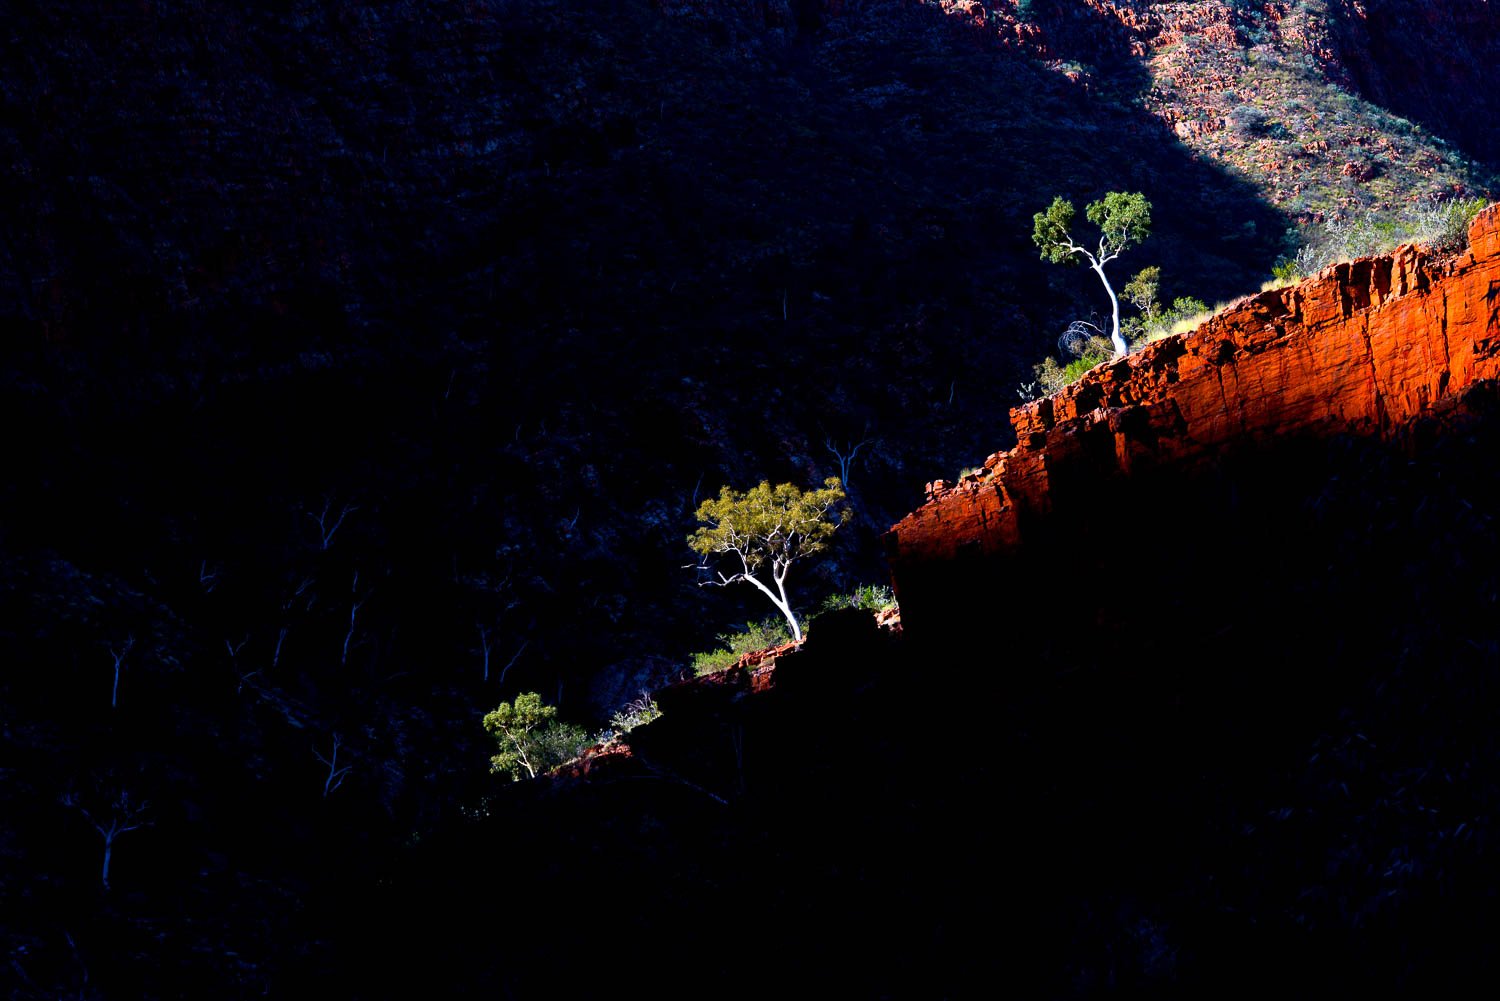 Aerial view of a high mountain wall with trees and plants, and a partially hitting sunlight, Late Light, Ormiston Gorge - Red Centre NT